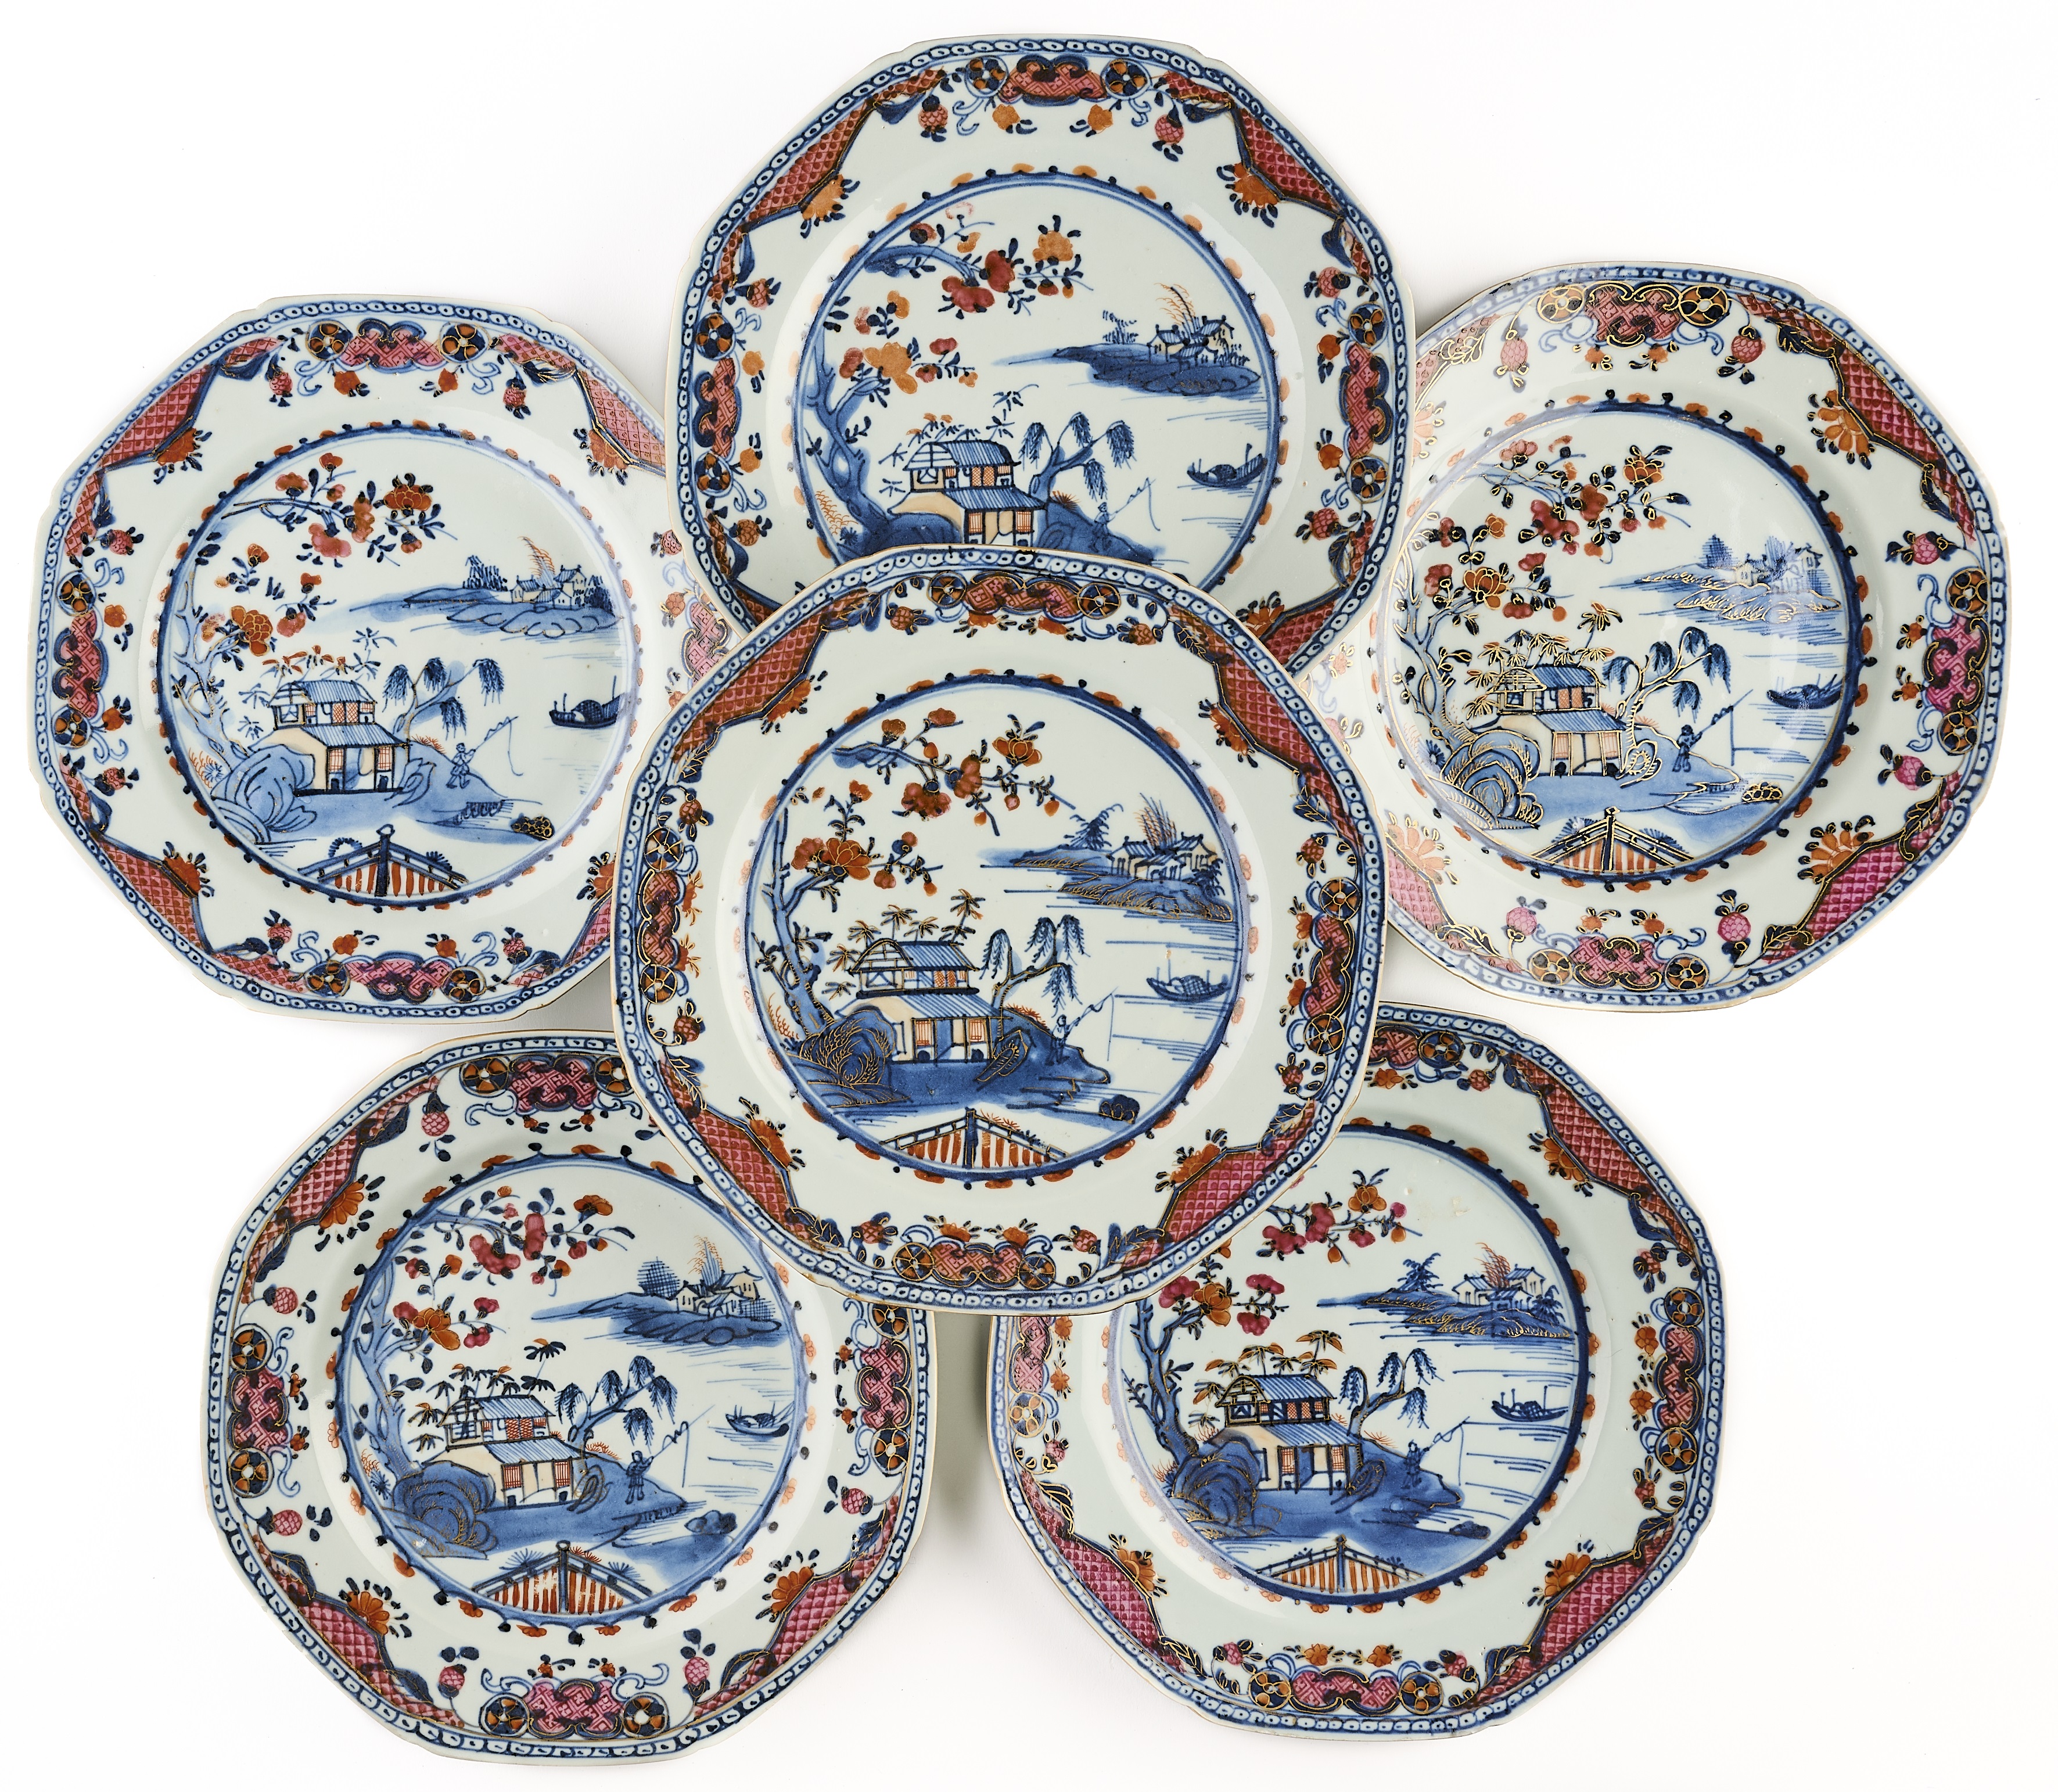 A SET OF SIX CHINESE IMARI EXPORT OCTAGONAL DINNER PLATES, QING DYNASTY, 18TH CENTURY